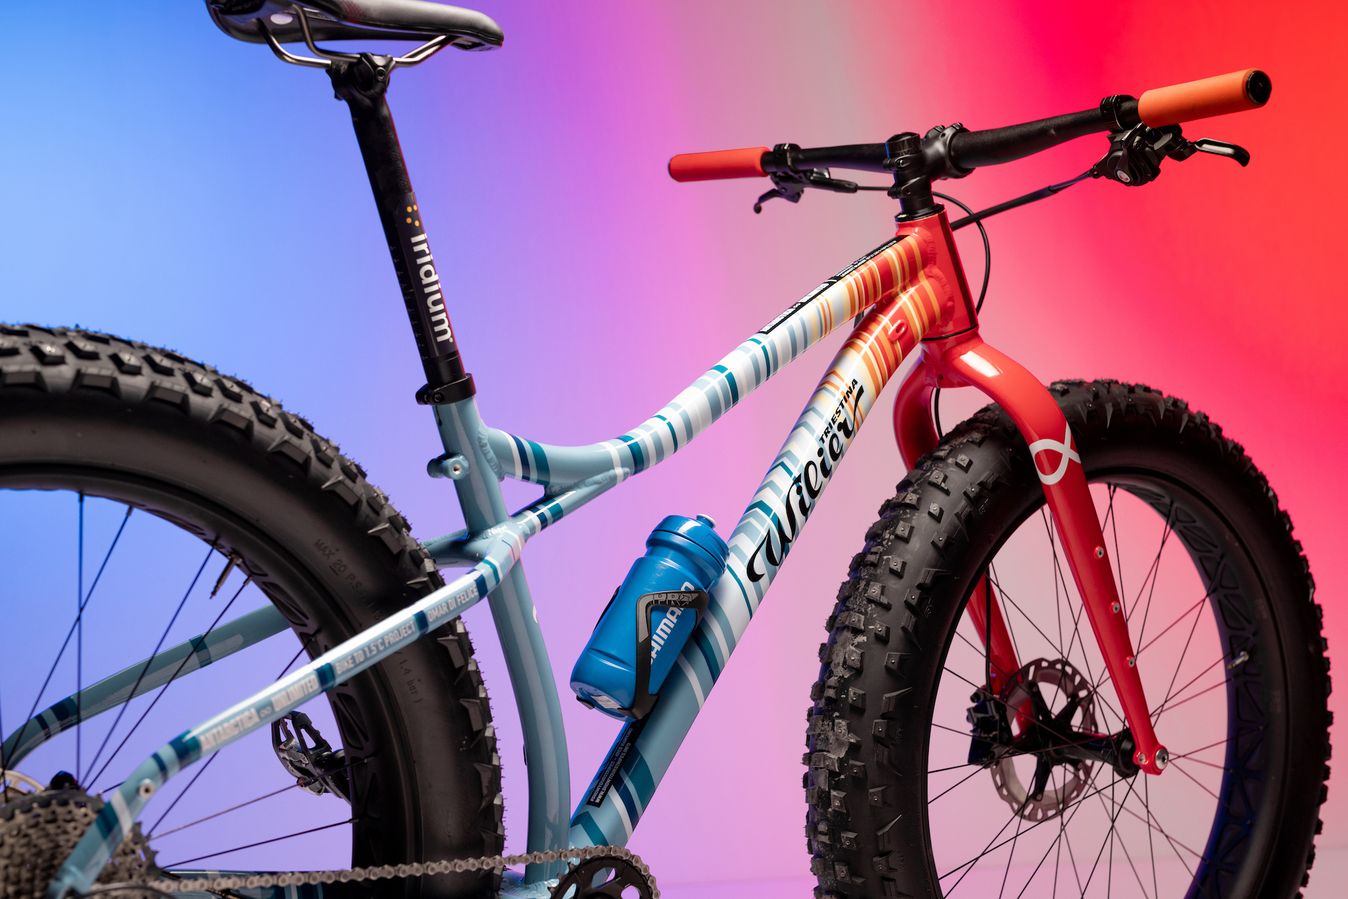 The Wilier fatbike is a no-frills workhorse